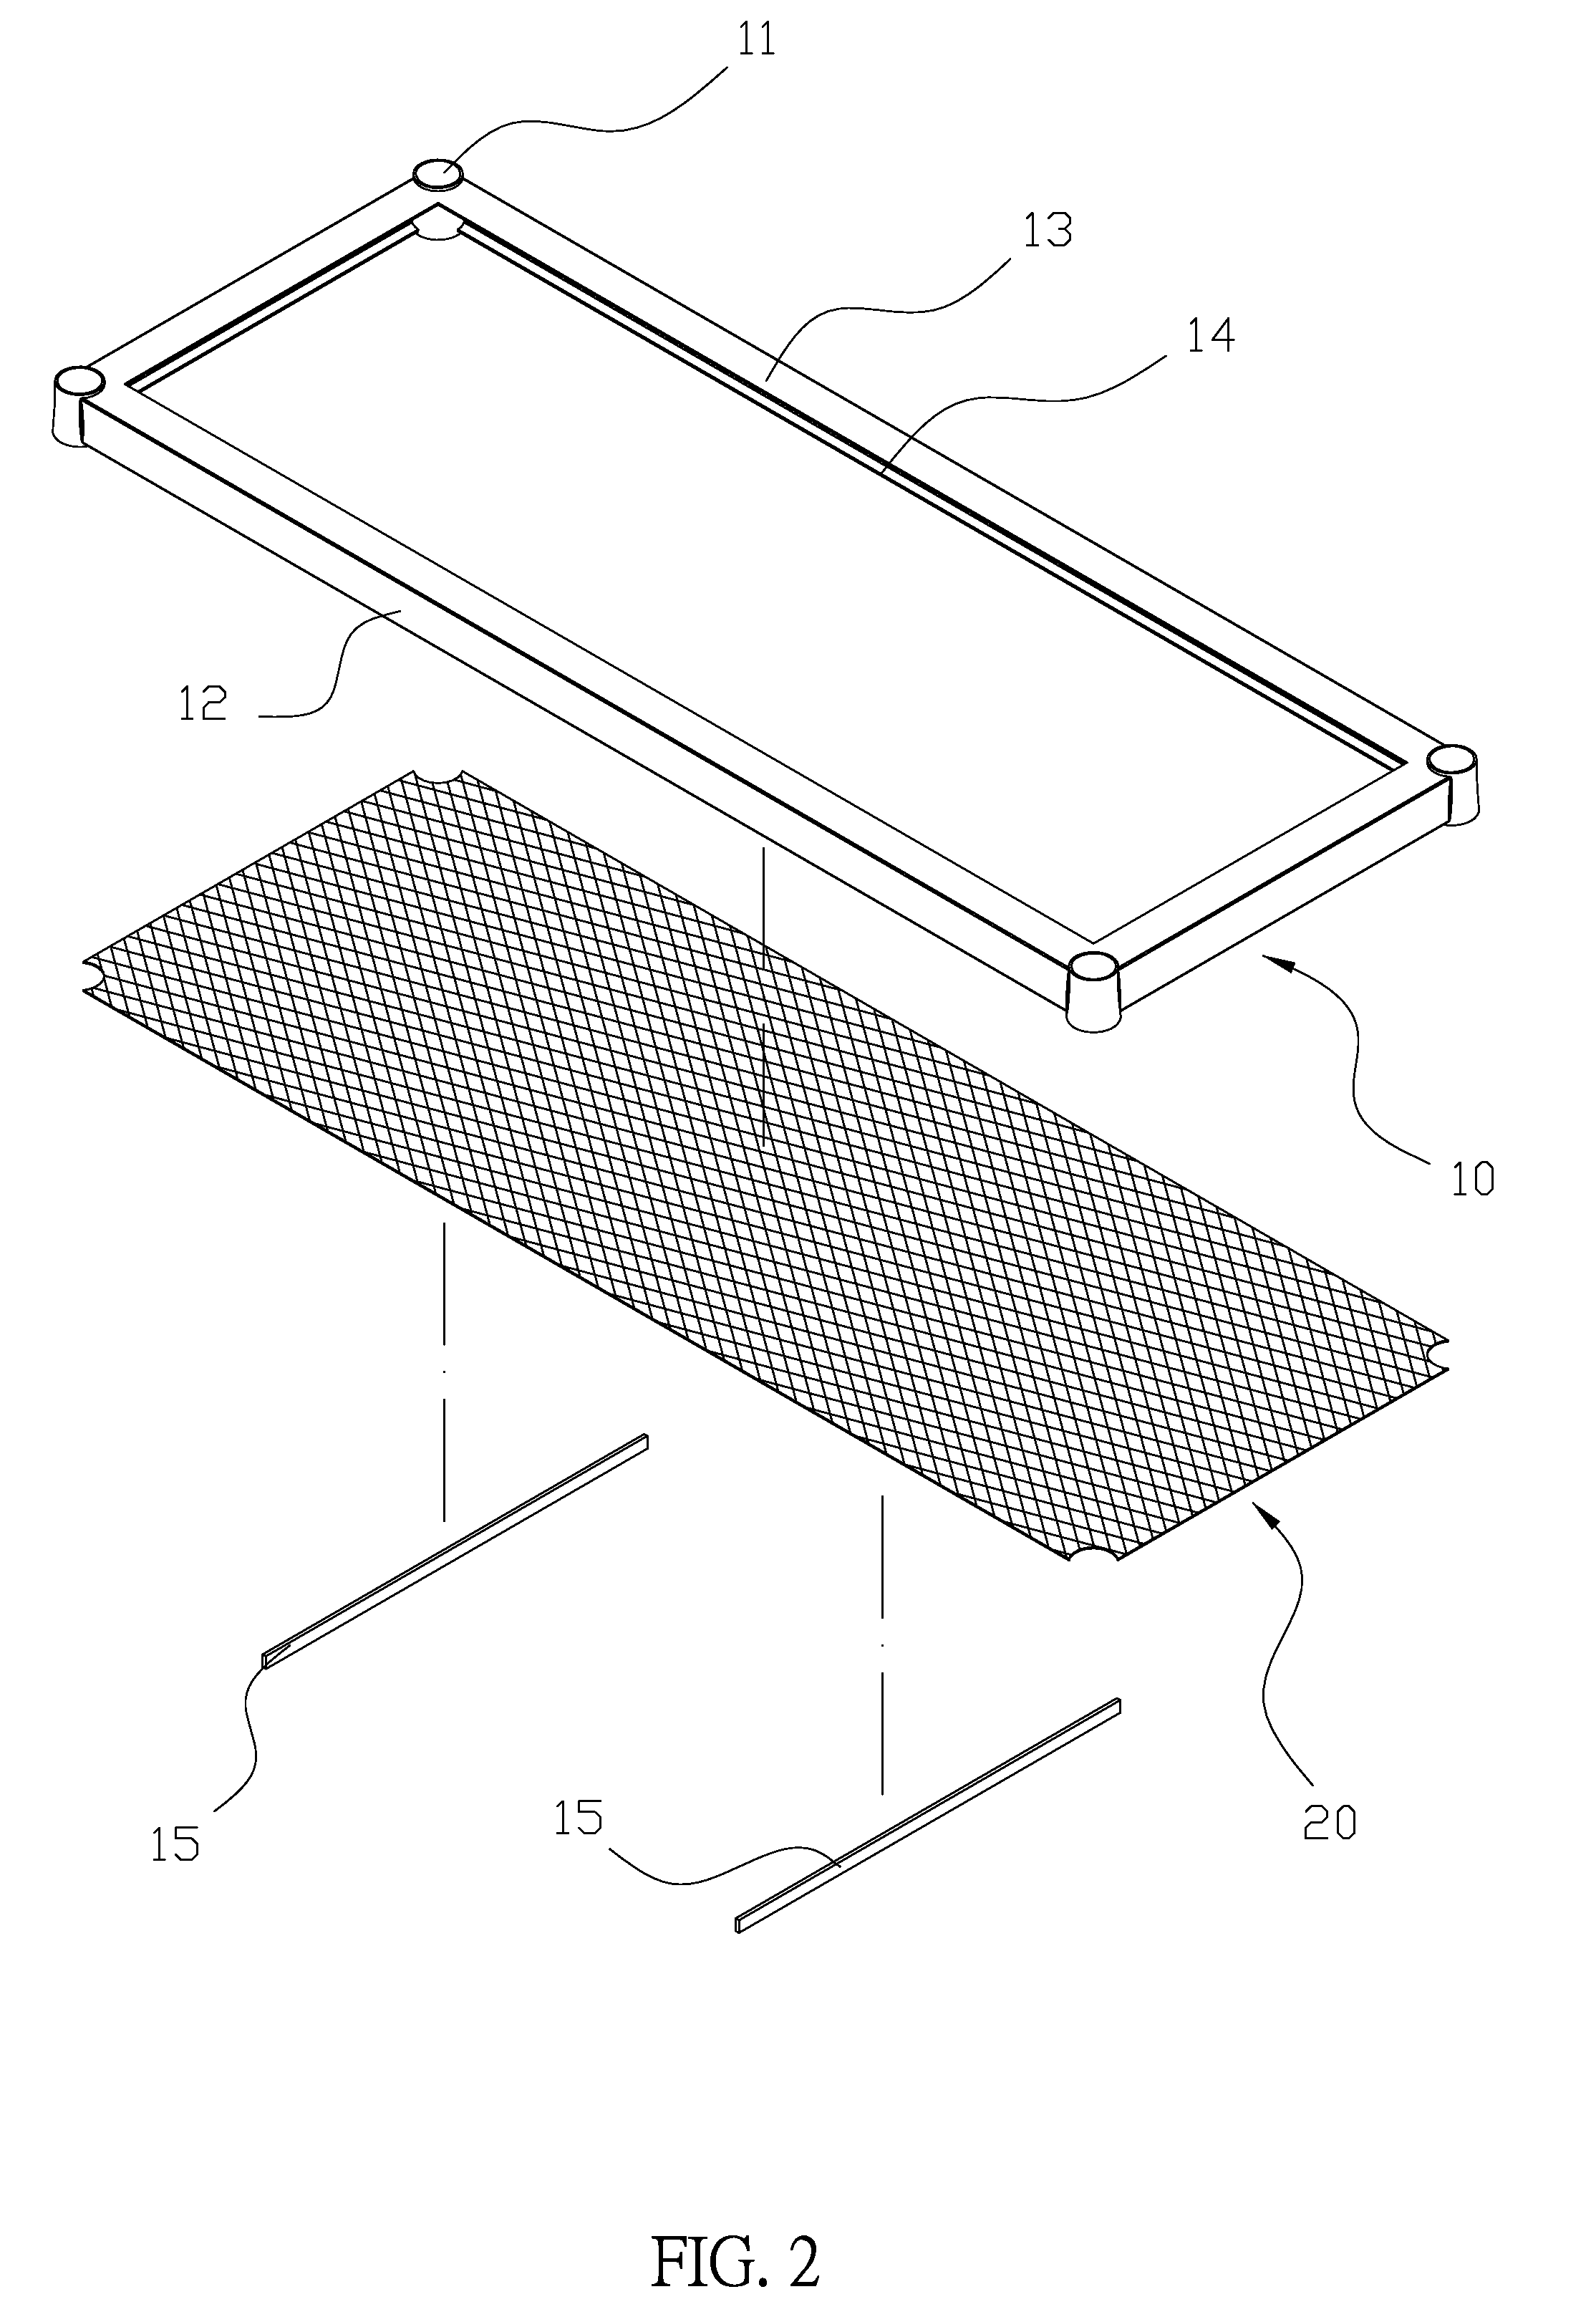 Shelving structure